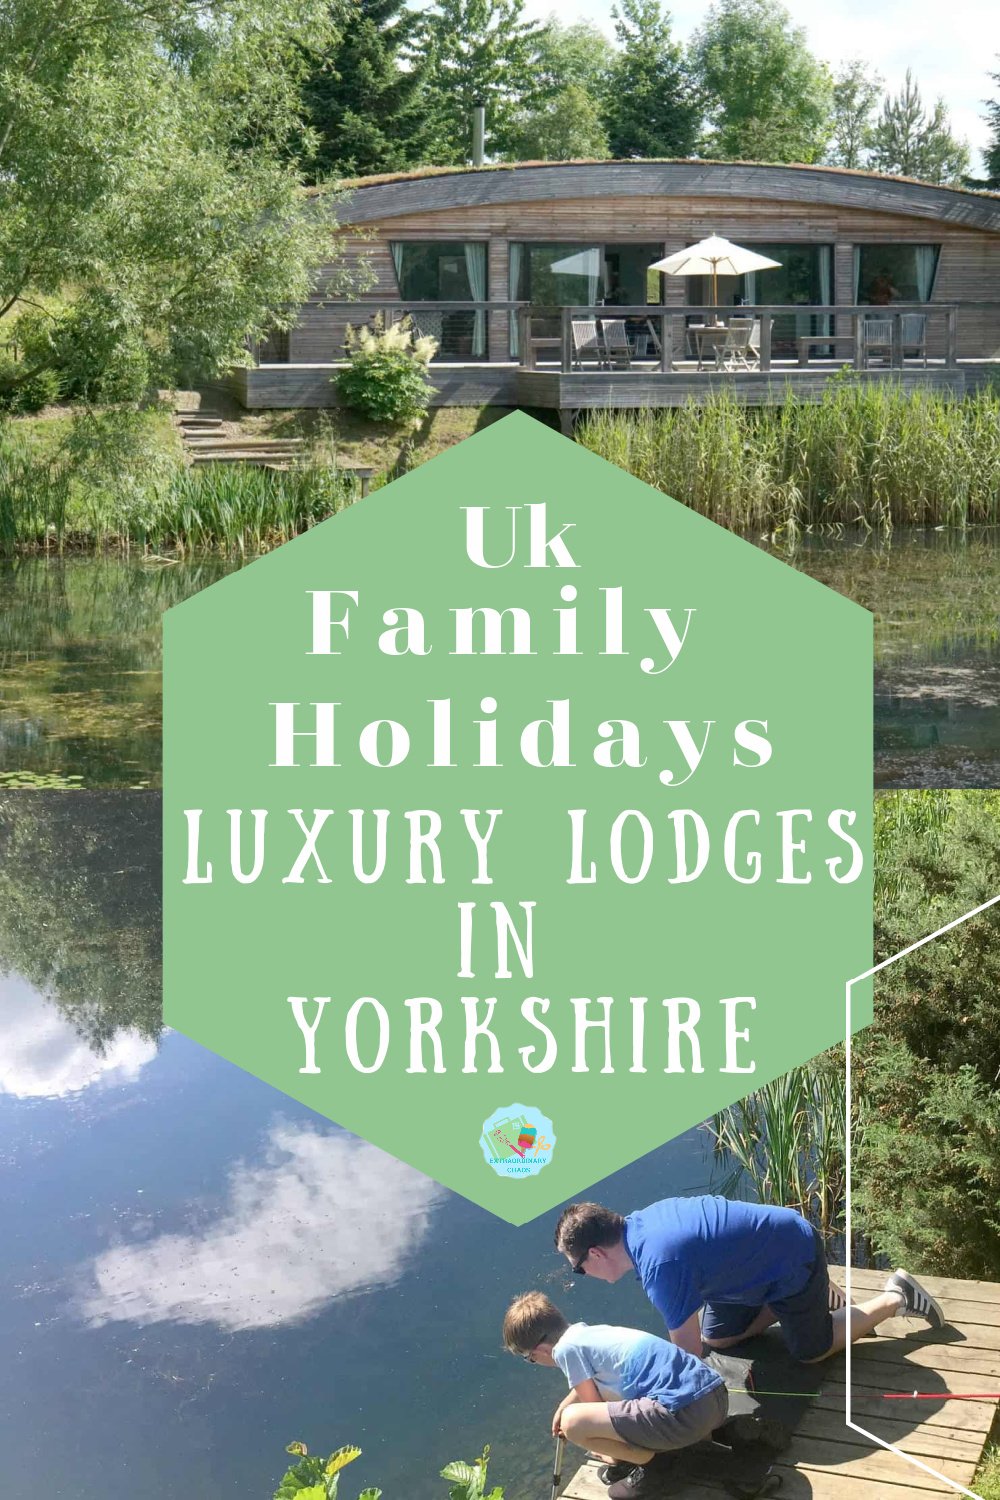 Tranquil Luxury Lodges in Richmond Yorkshire for family holidays around a fishing lake